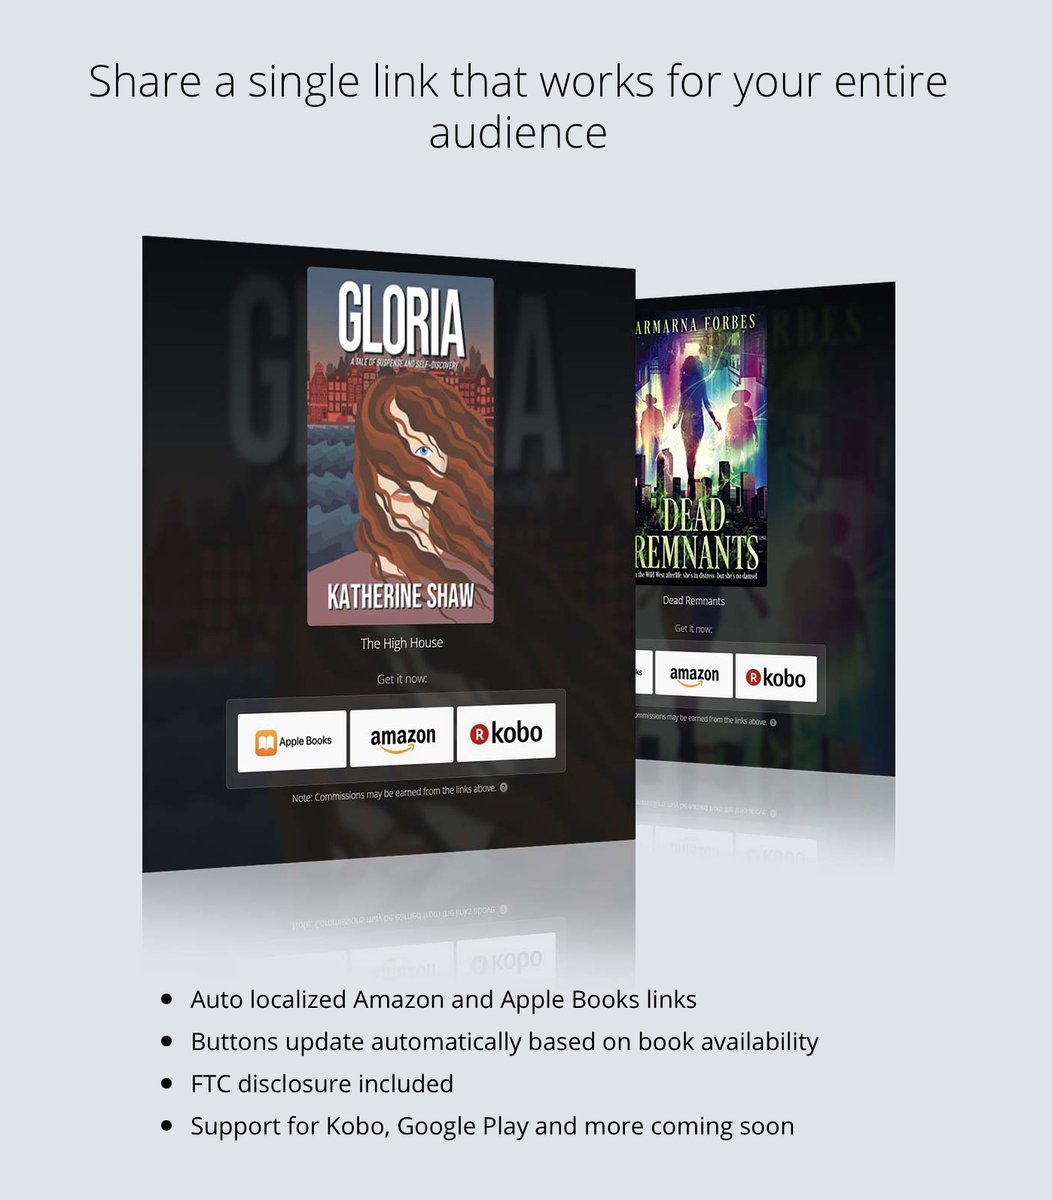 Universal book links to boost international book sales: @Booklinker | buff.ly/3dri0CK “It's a forever-free tool that helps authors sell more books with single links for their audience.” @Booklinker is the exclusive sponsor of #BookMarketingChat with @BadRedheadMedia